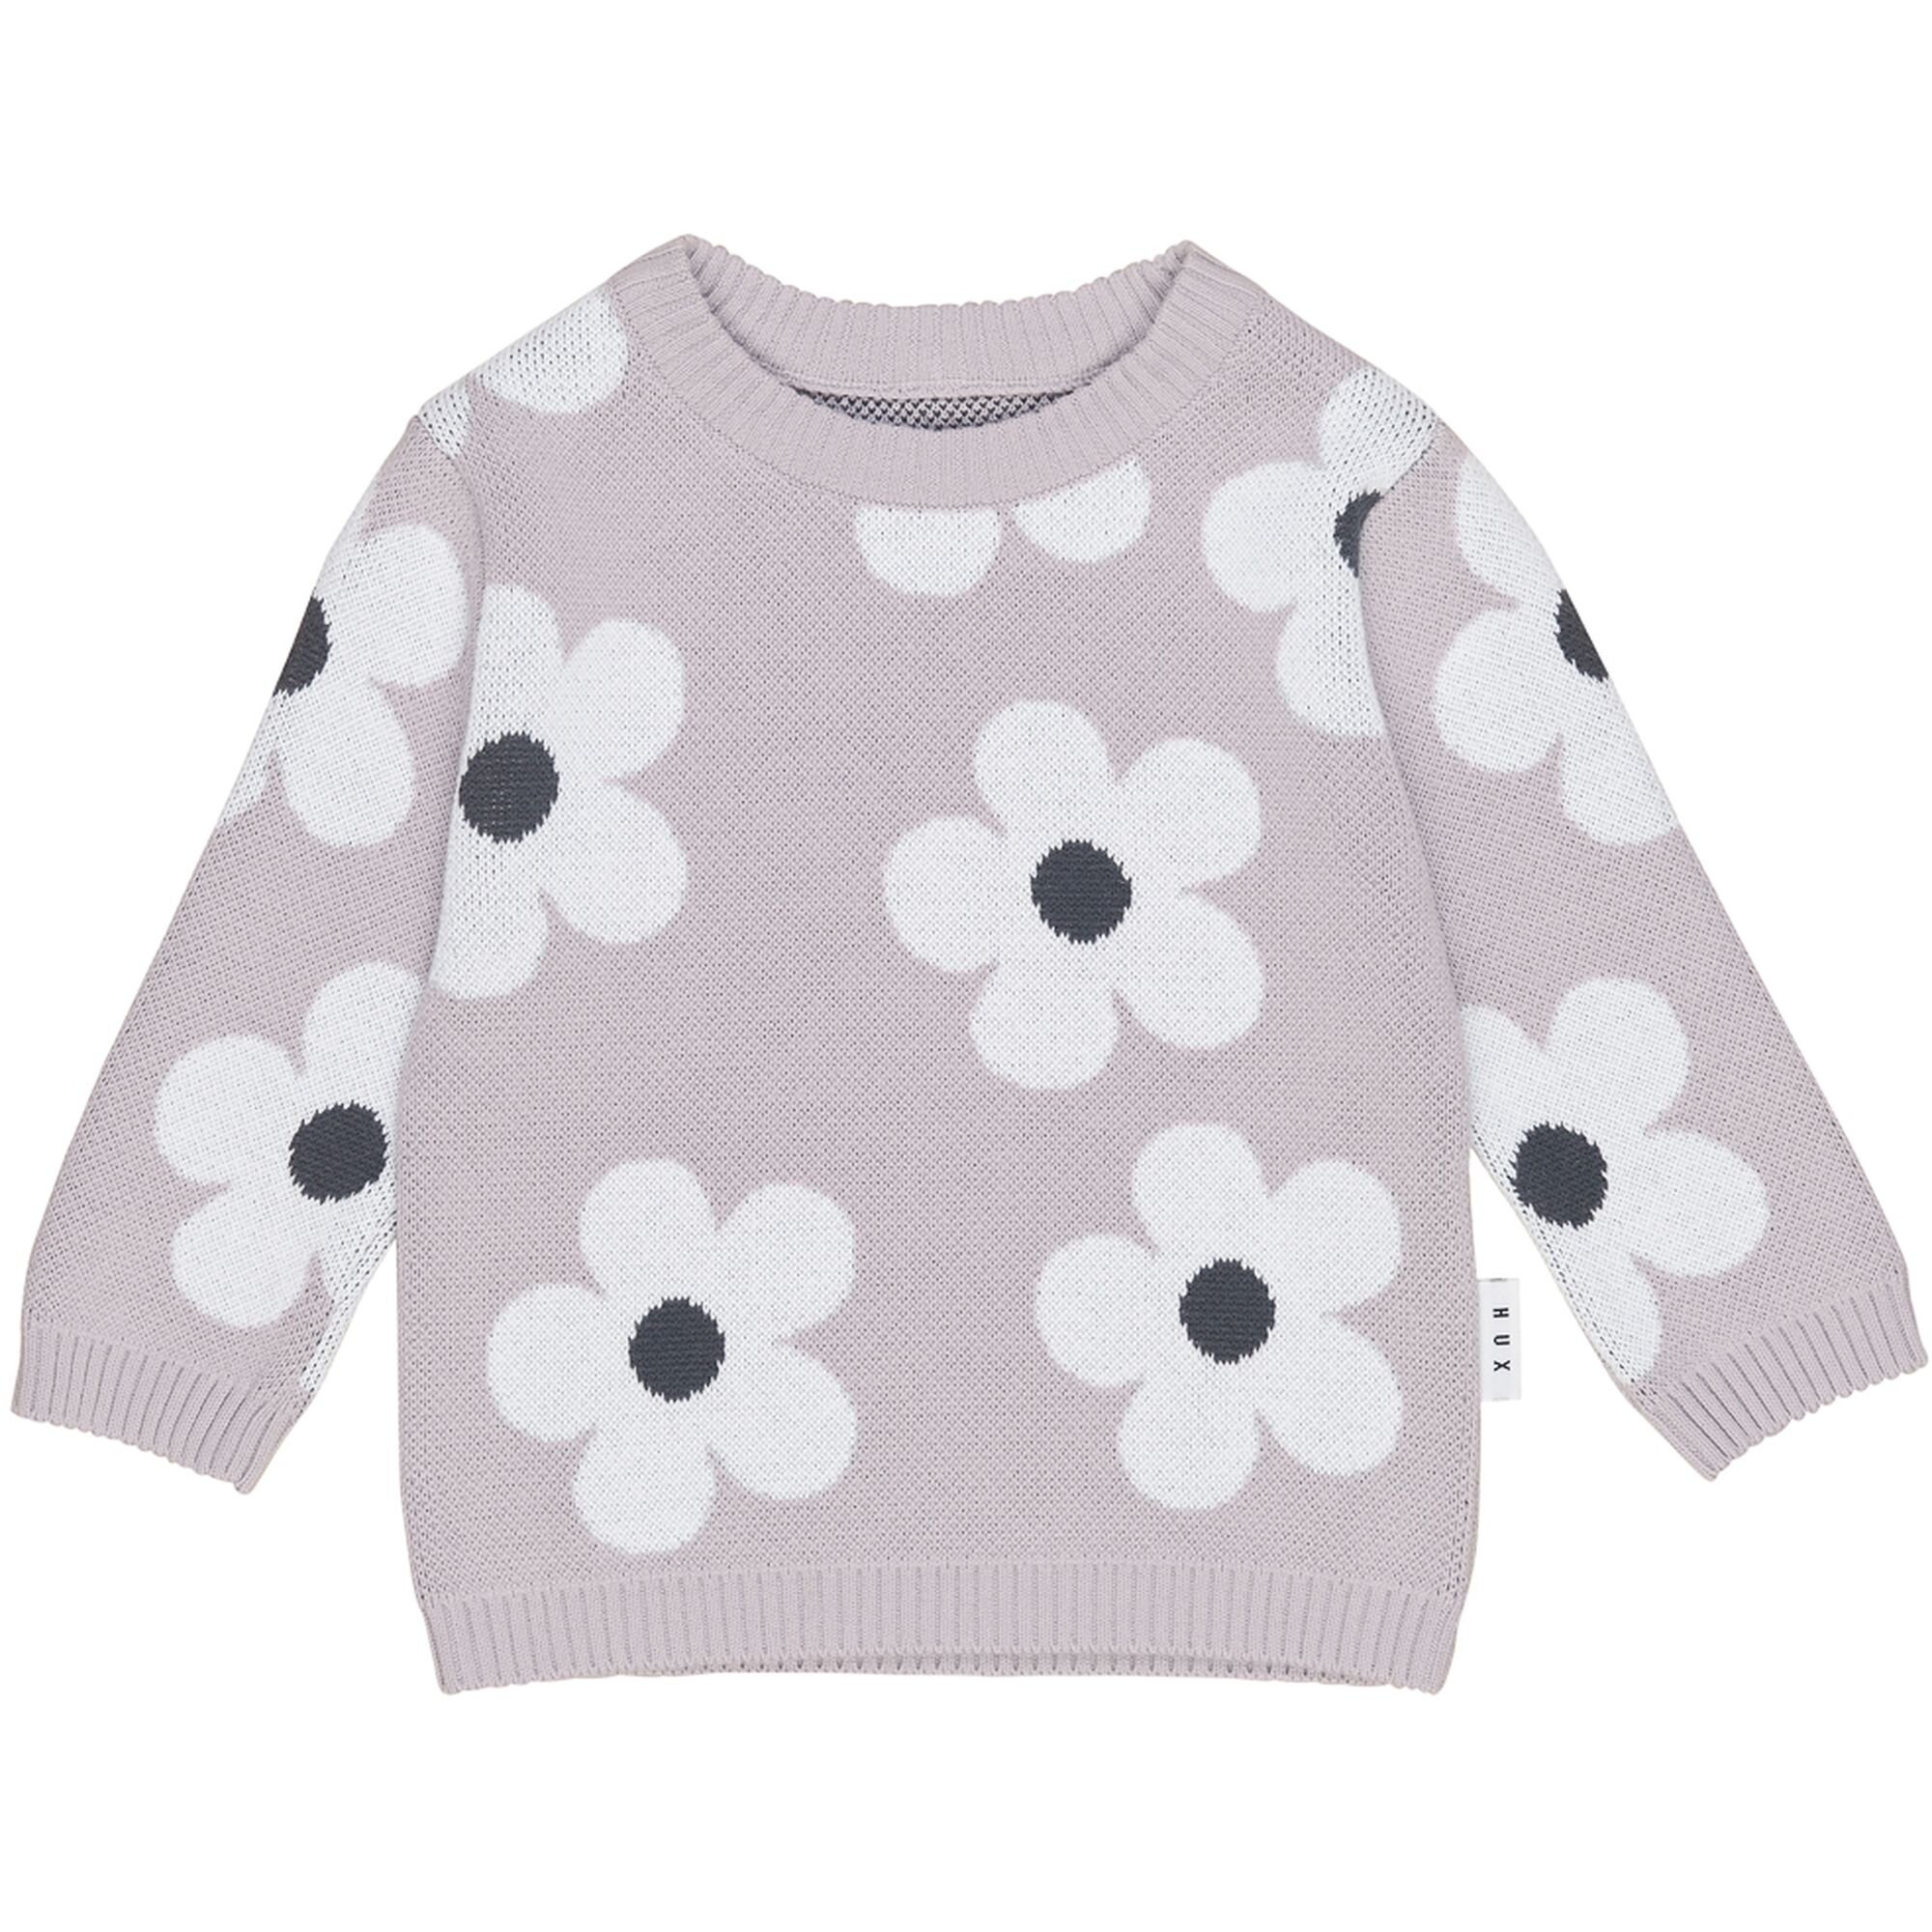 Huxbaby Floral Knit Jumper - CLOTHING-BABY-Baby Outerwear : Kids ...